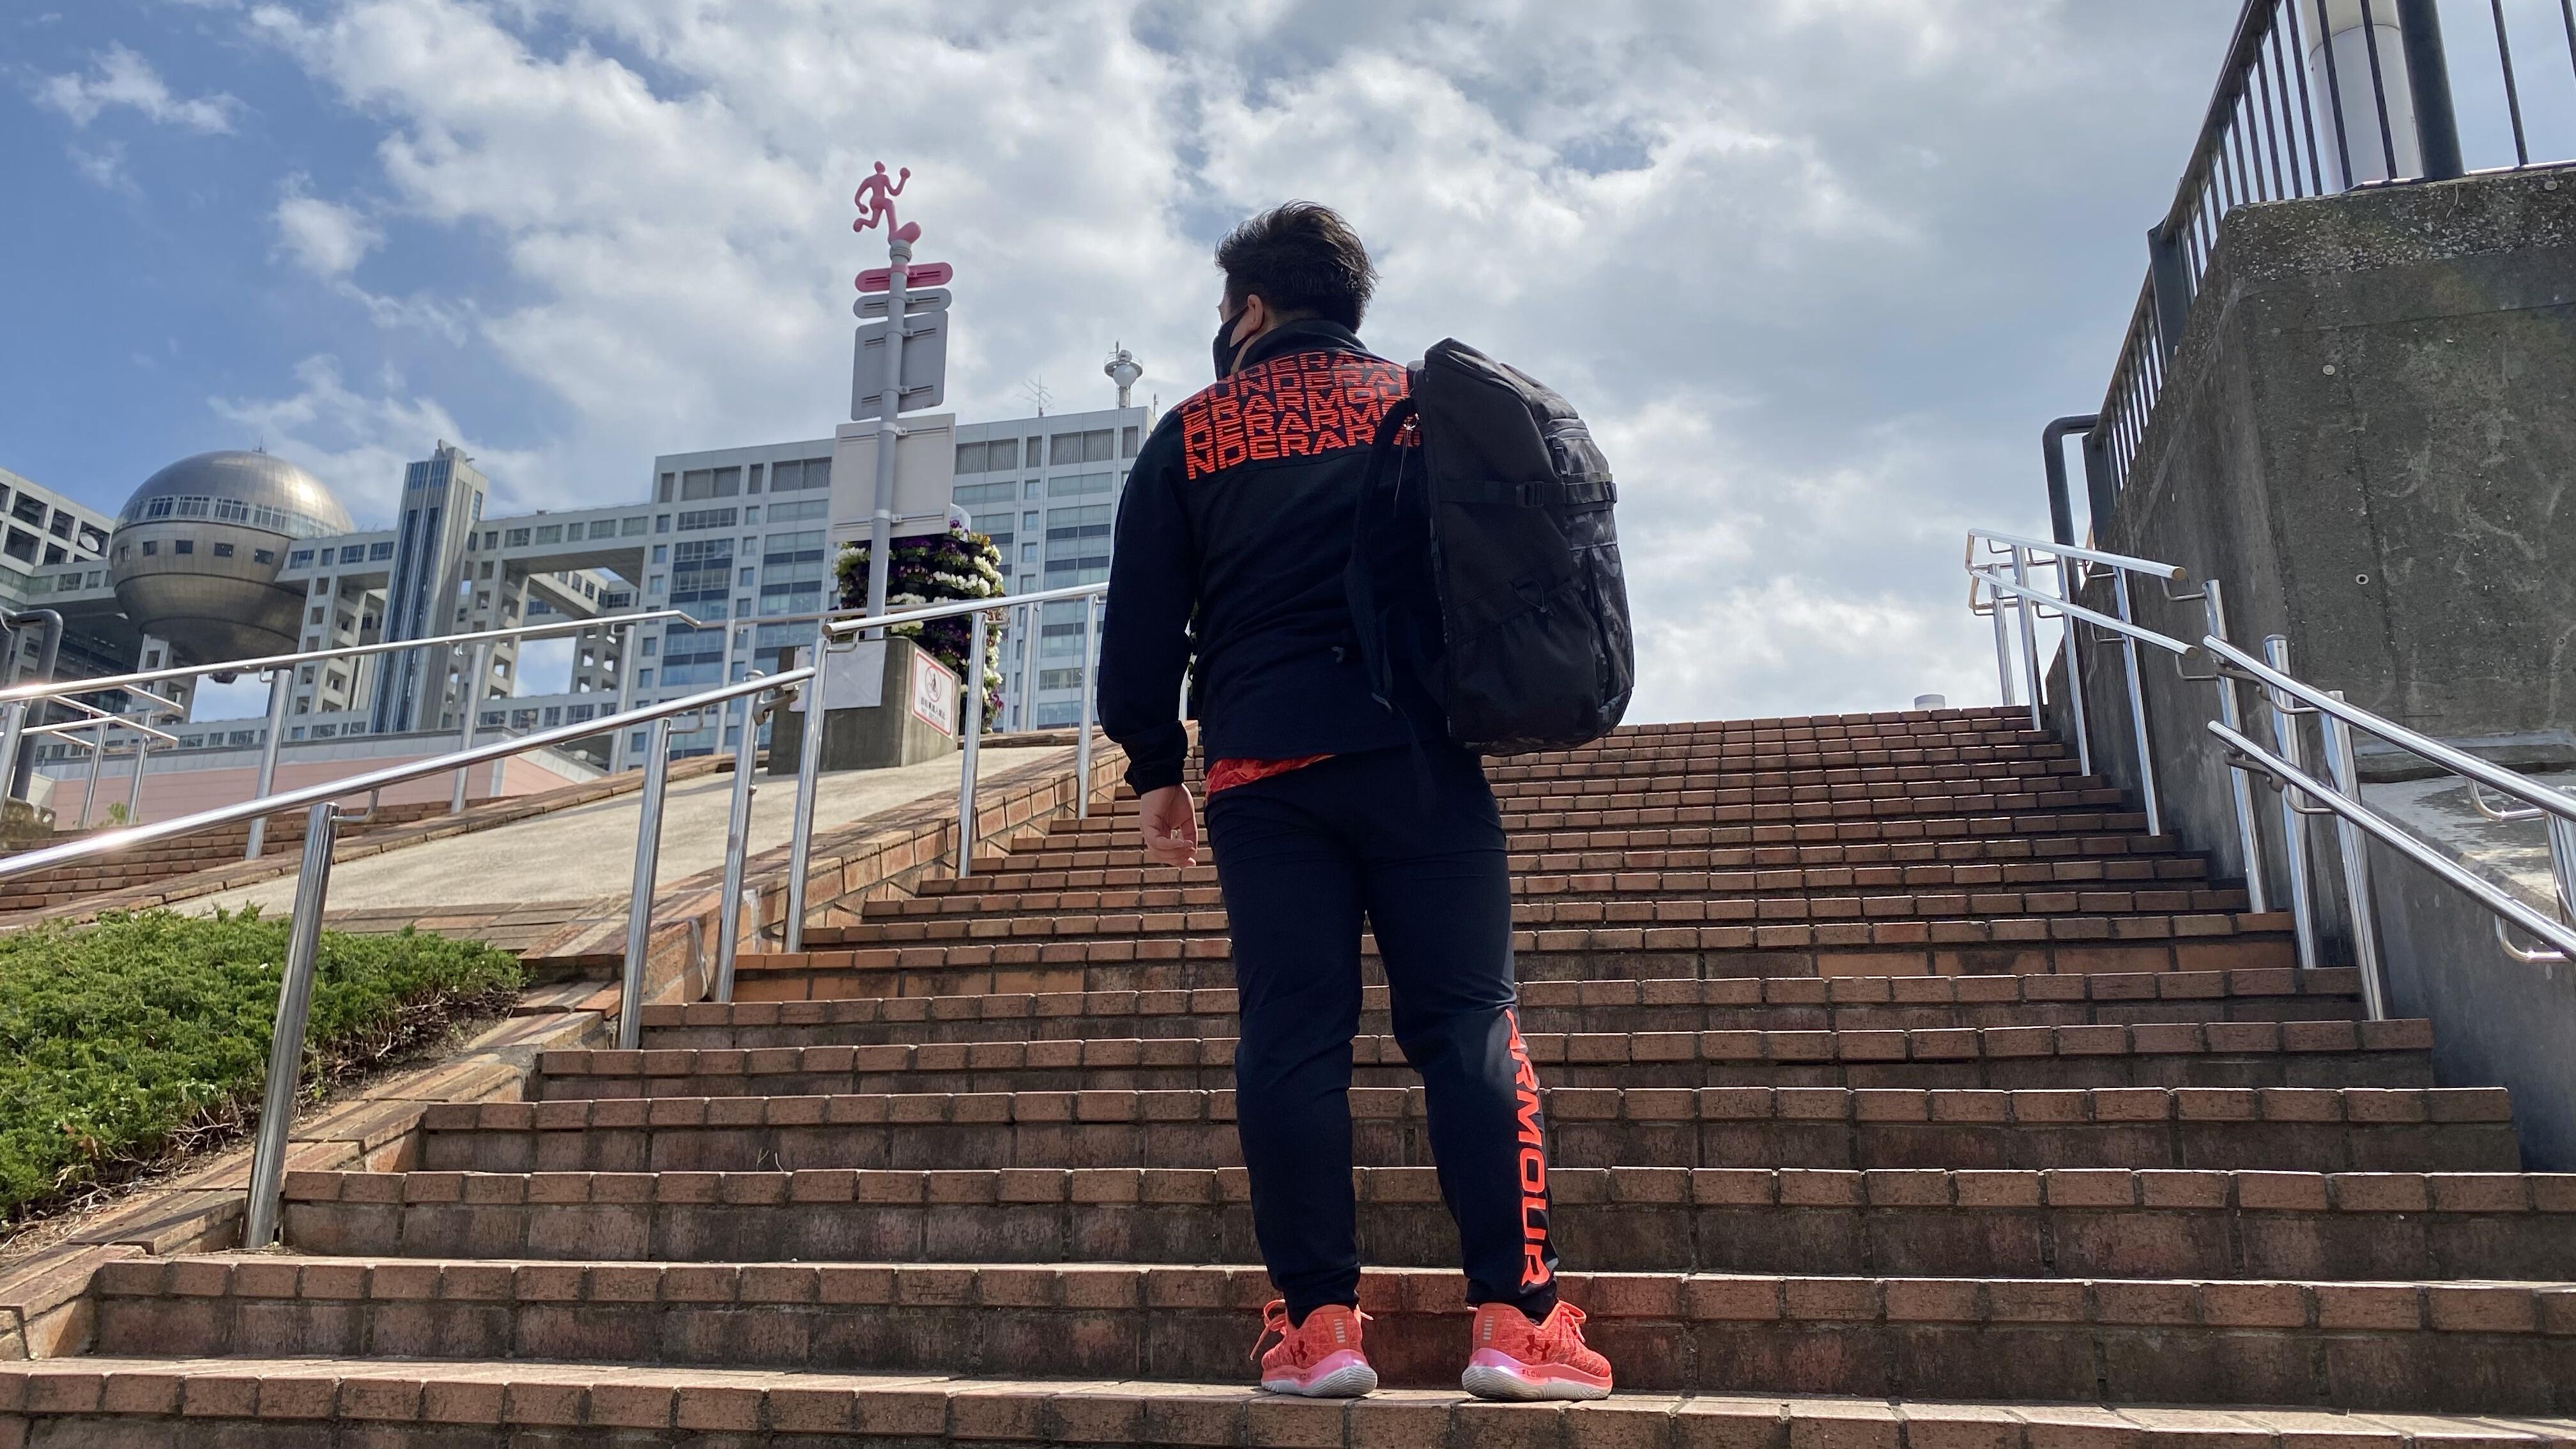 UA Cool Backpack 2.0 ご紹介！ | UNDERARMOUR OFFICIAL | SHOP BLOG